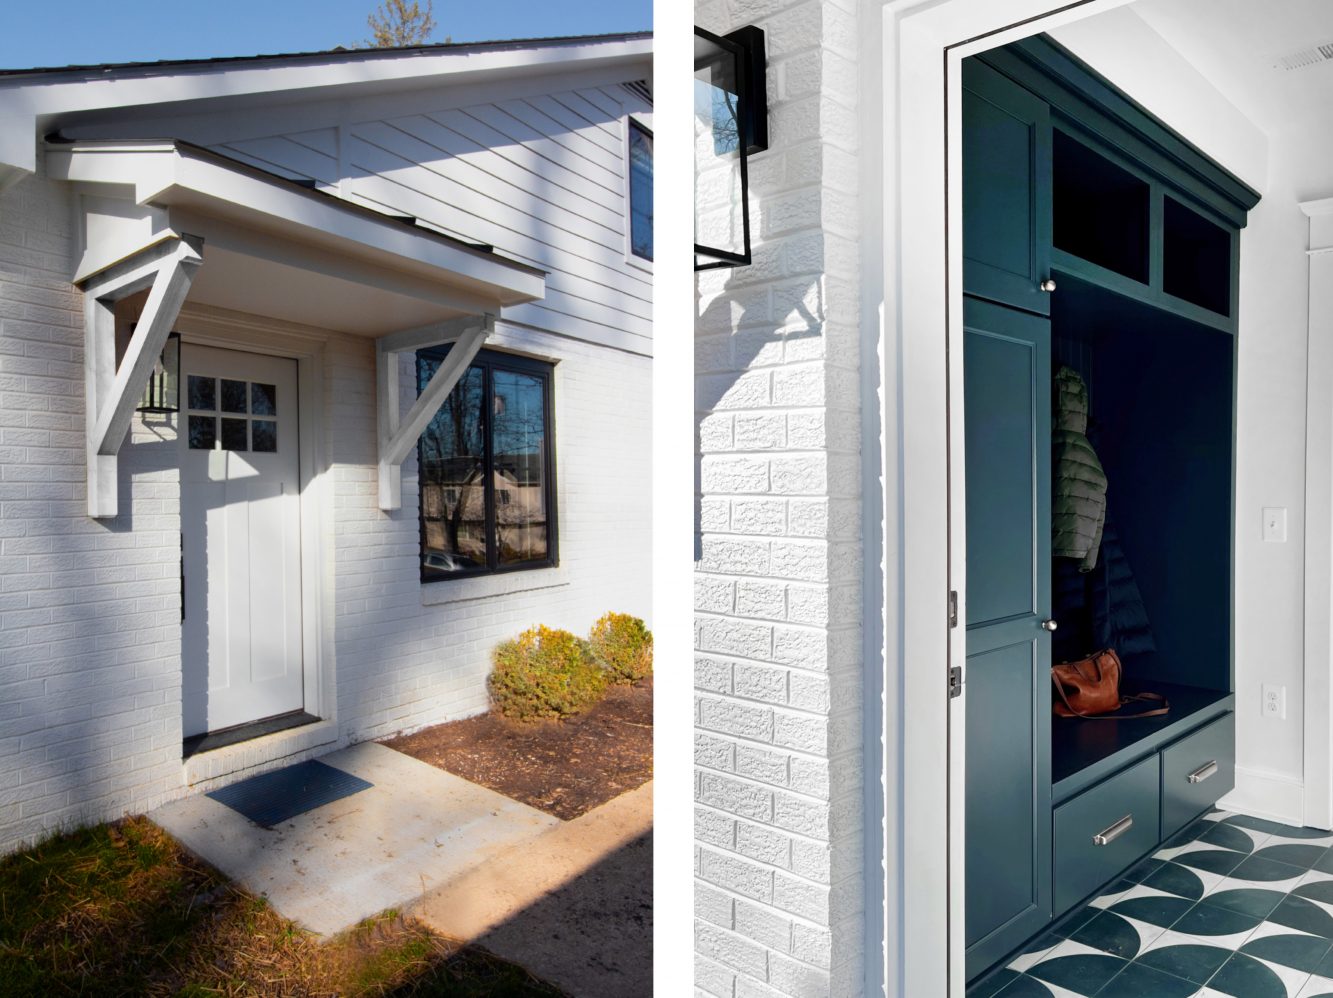 Exterior and Interior view of home addition, covered entry and stylish, hardworking mud room showing playful blue tile and built-in cabinetry